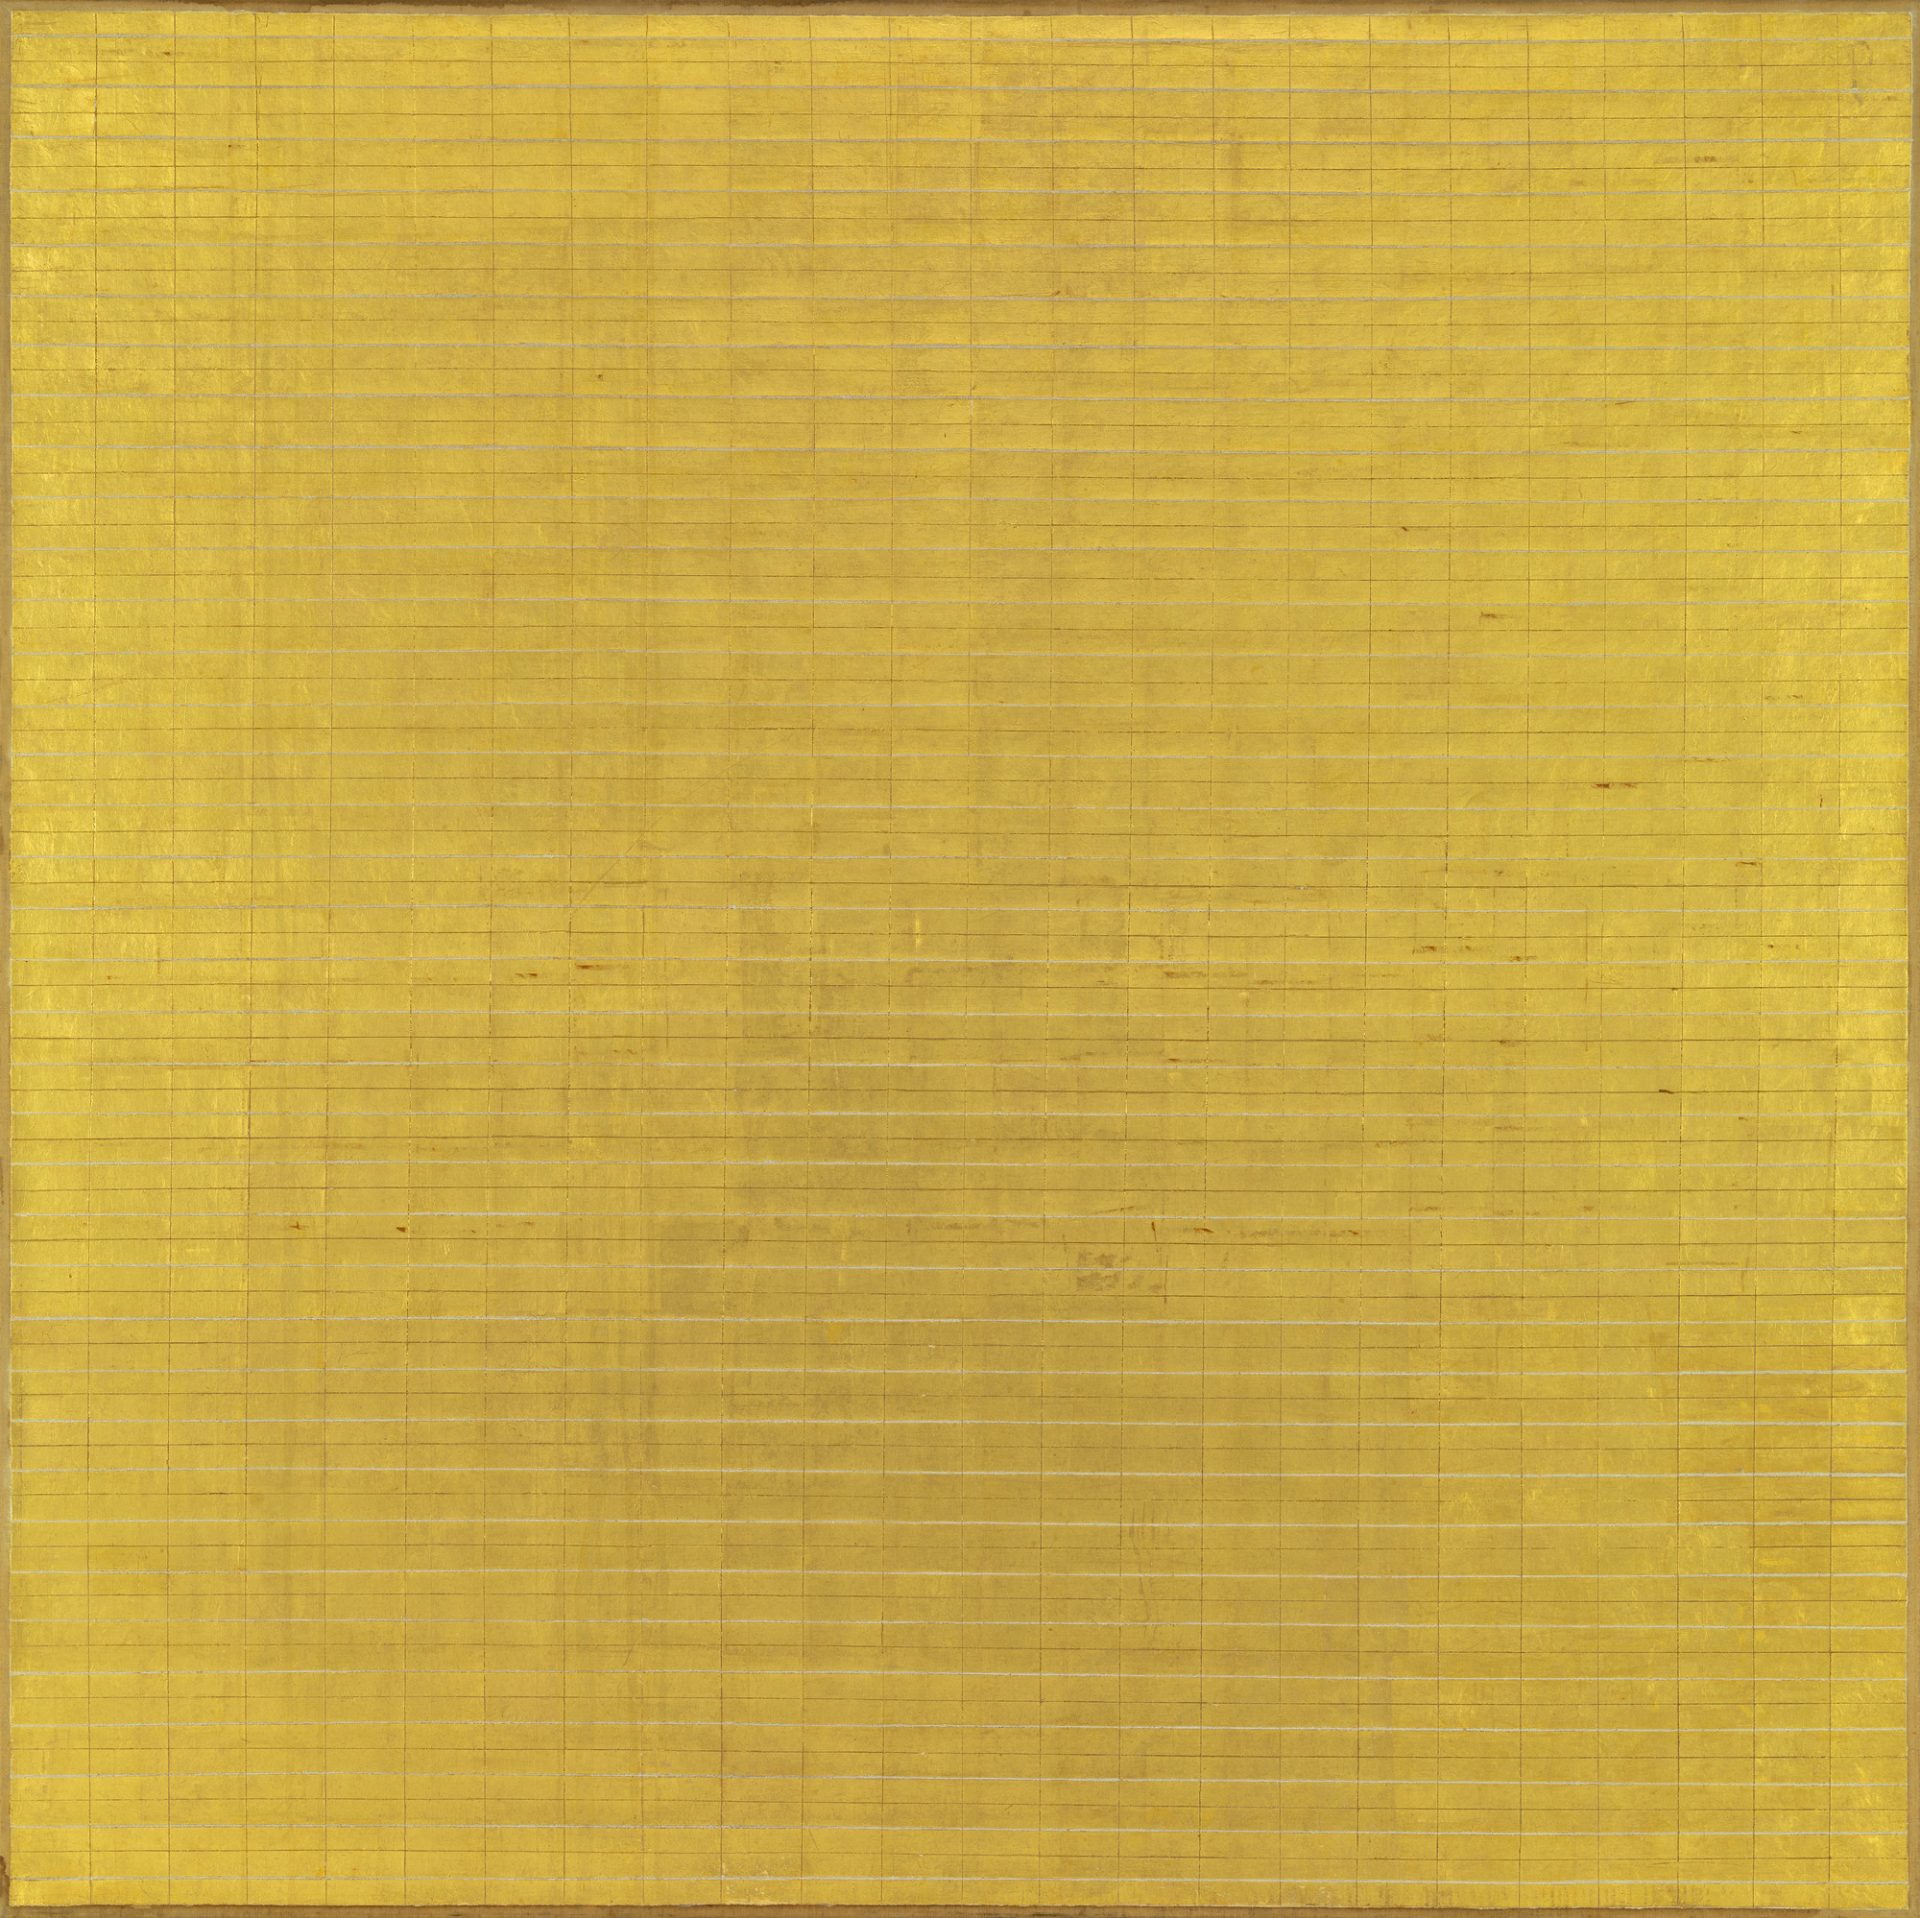 Abstract painting titled Friendship by Agnes Martin, composed of meticulously arranged gold leaf squares on a six-foot square canvas, reflecting the shimmering essence of light and tranquility.